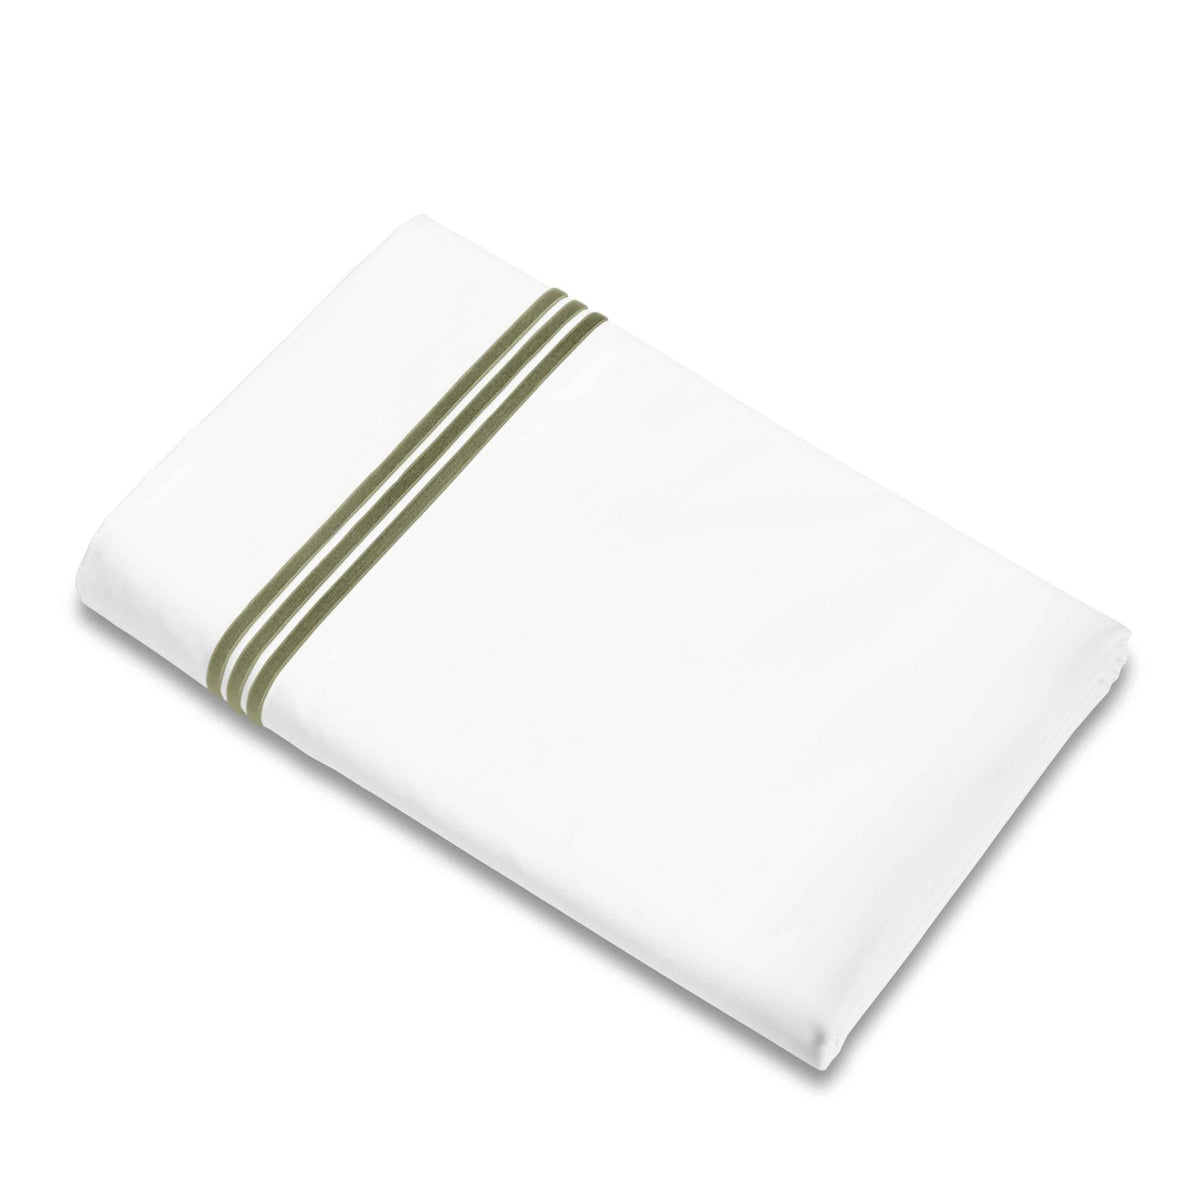 Flat Sheet of Signoria Platinum Percale Bedding in White/Olive Green Color